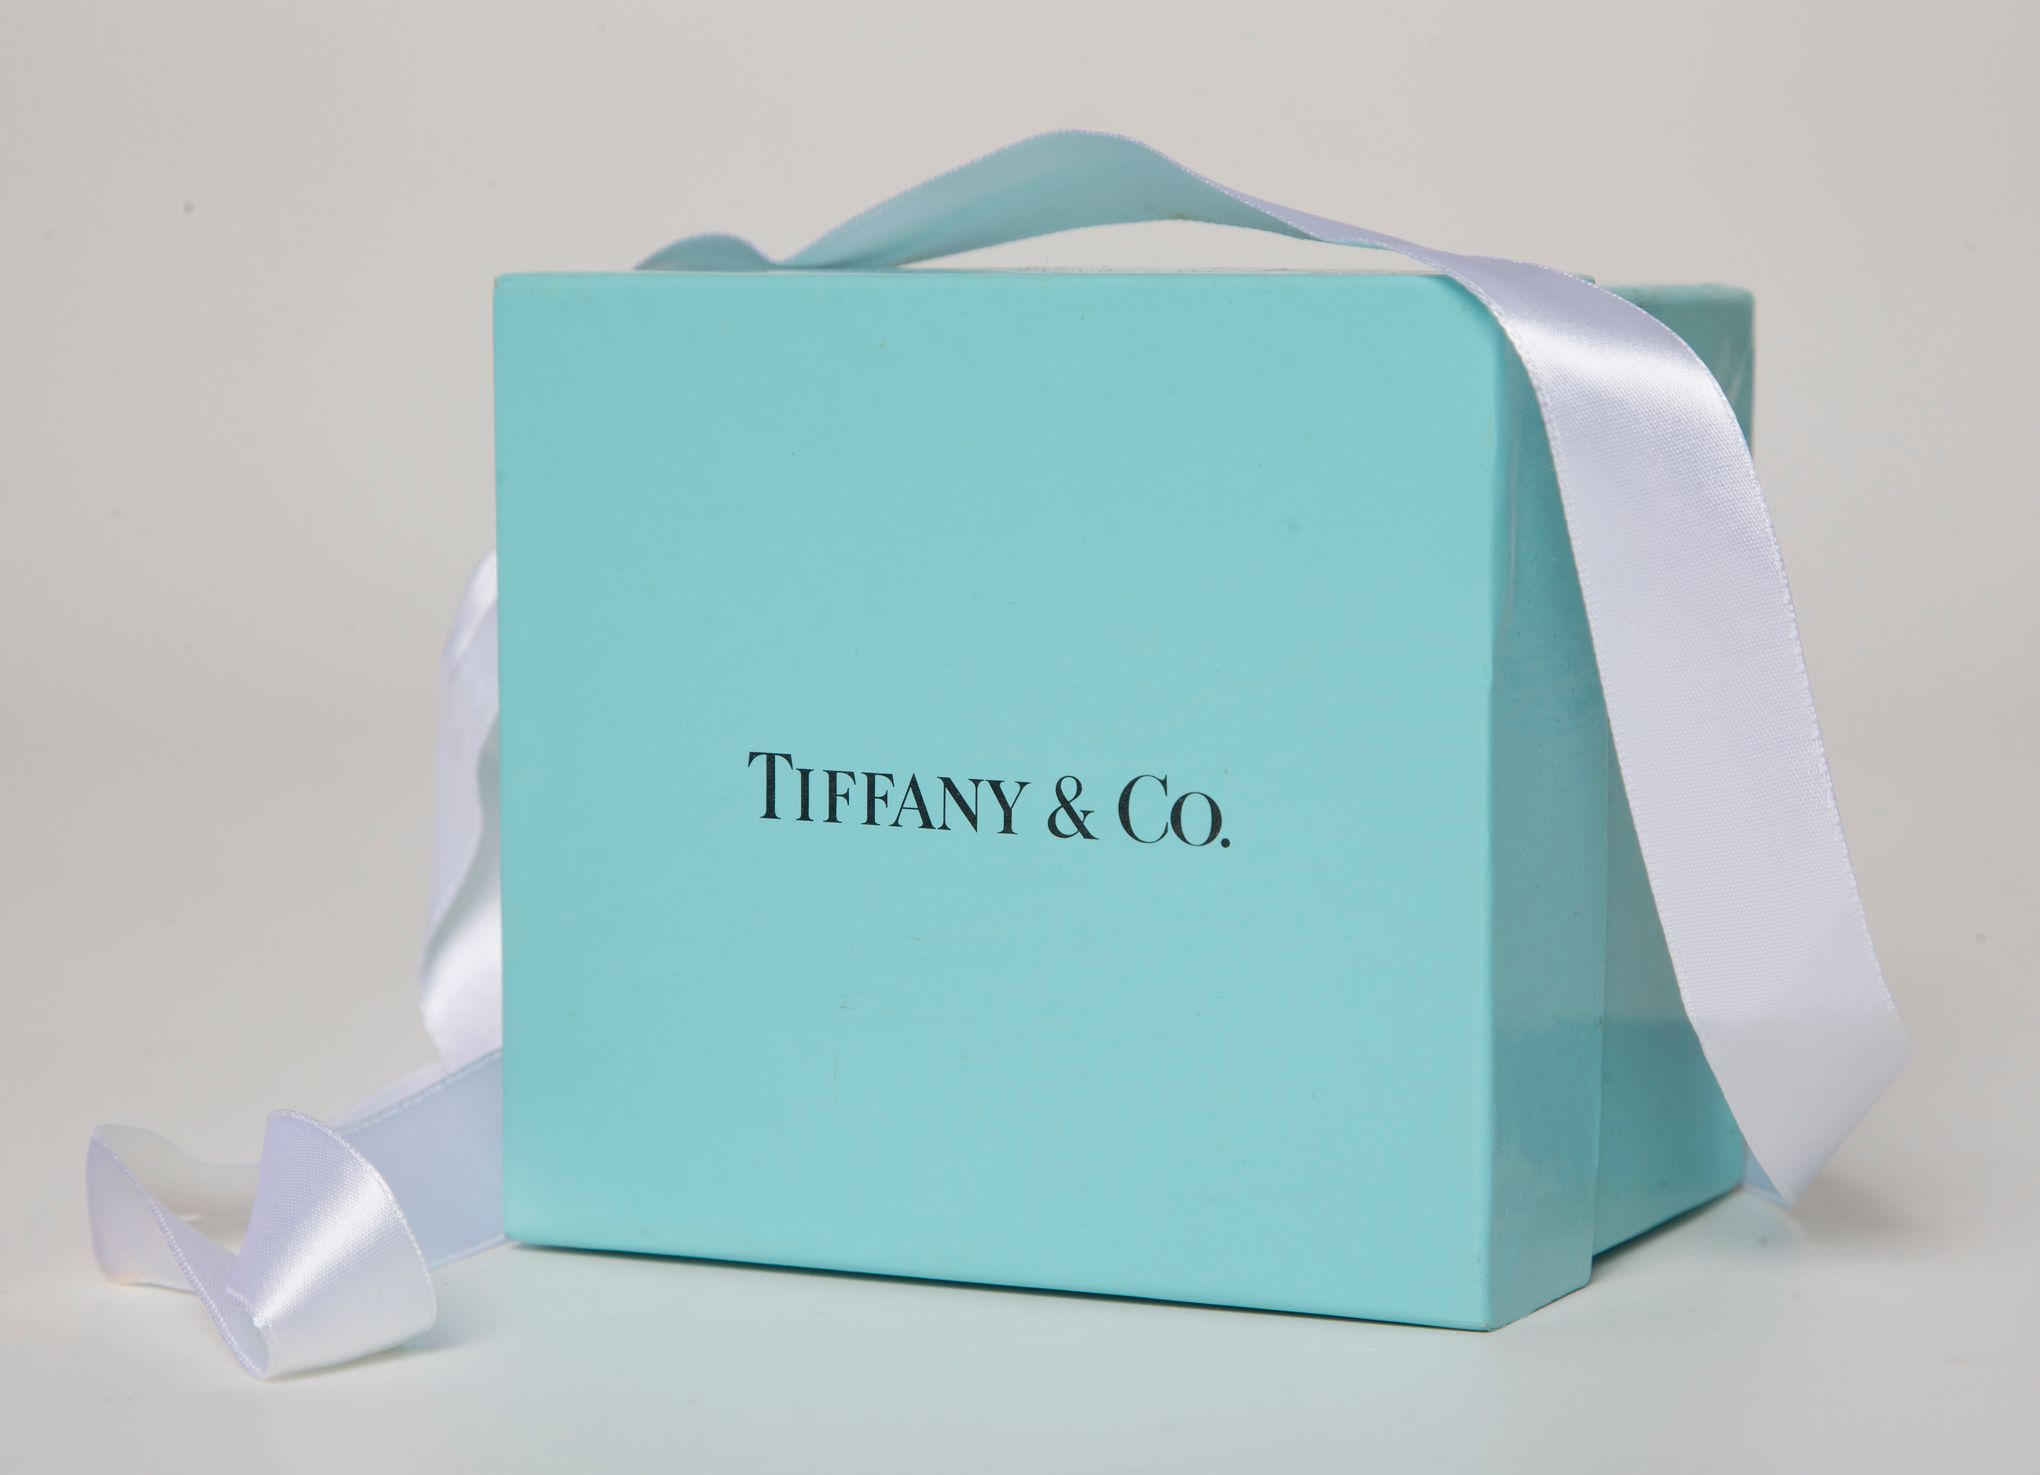 Can LVMH Get Out of Its Deal to Buy Tiffany? - The New York Times